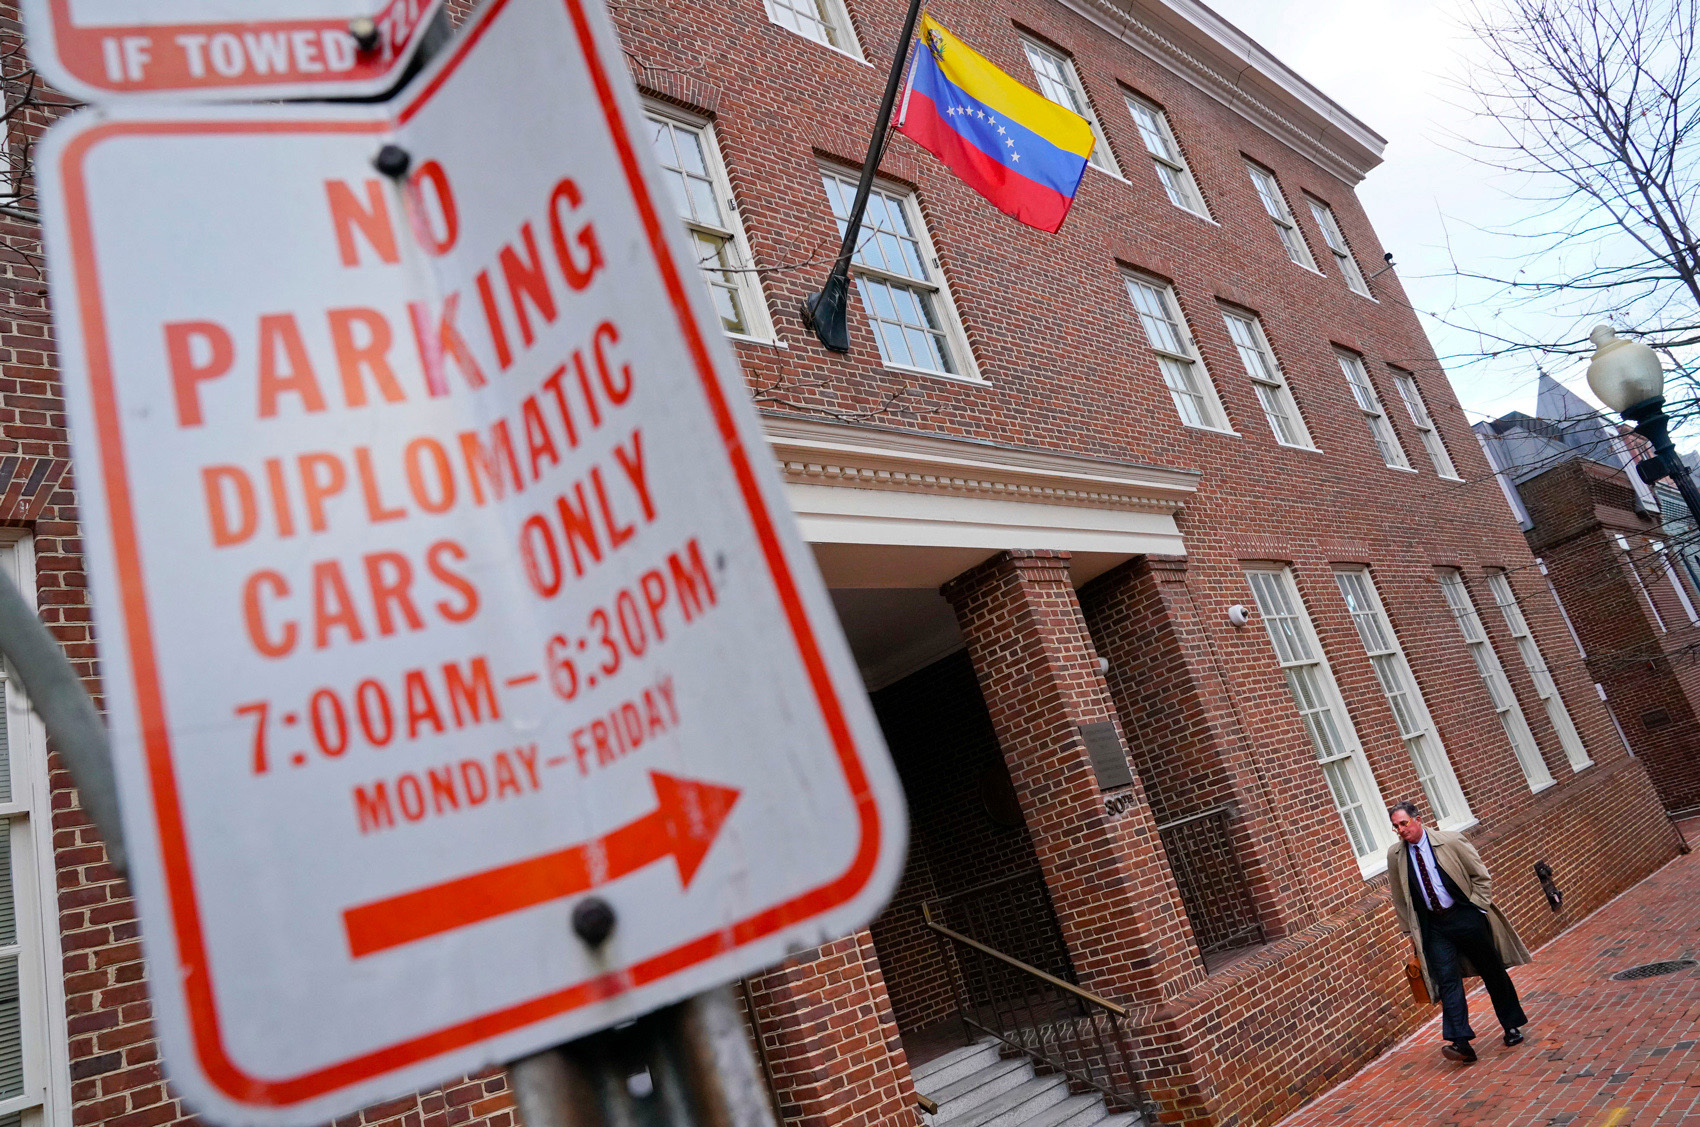 Venezuela's Embassy in Washington, Thursday, Jan. 24, 2019. Venezuela will close its embassy and all consulates in an announcement one day after Venezuela's President Nicolas Maduro broke off diplomatic relations in response to US recognition of opposition leader Juan Guaido as interim president.